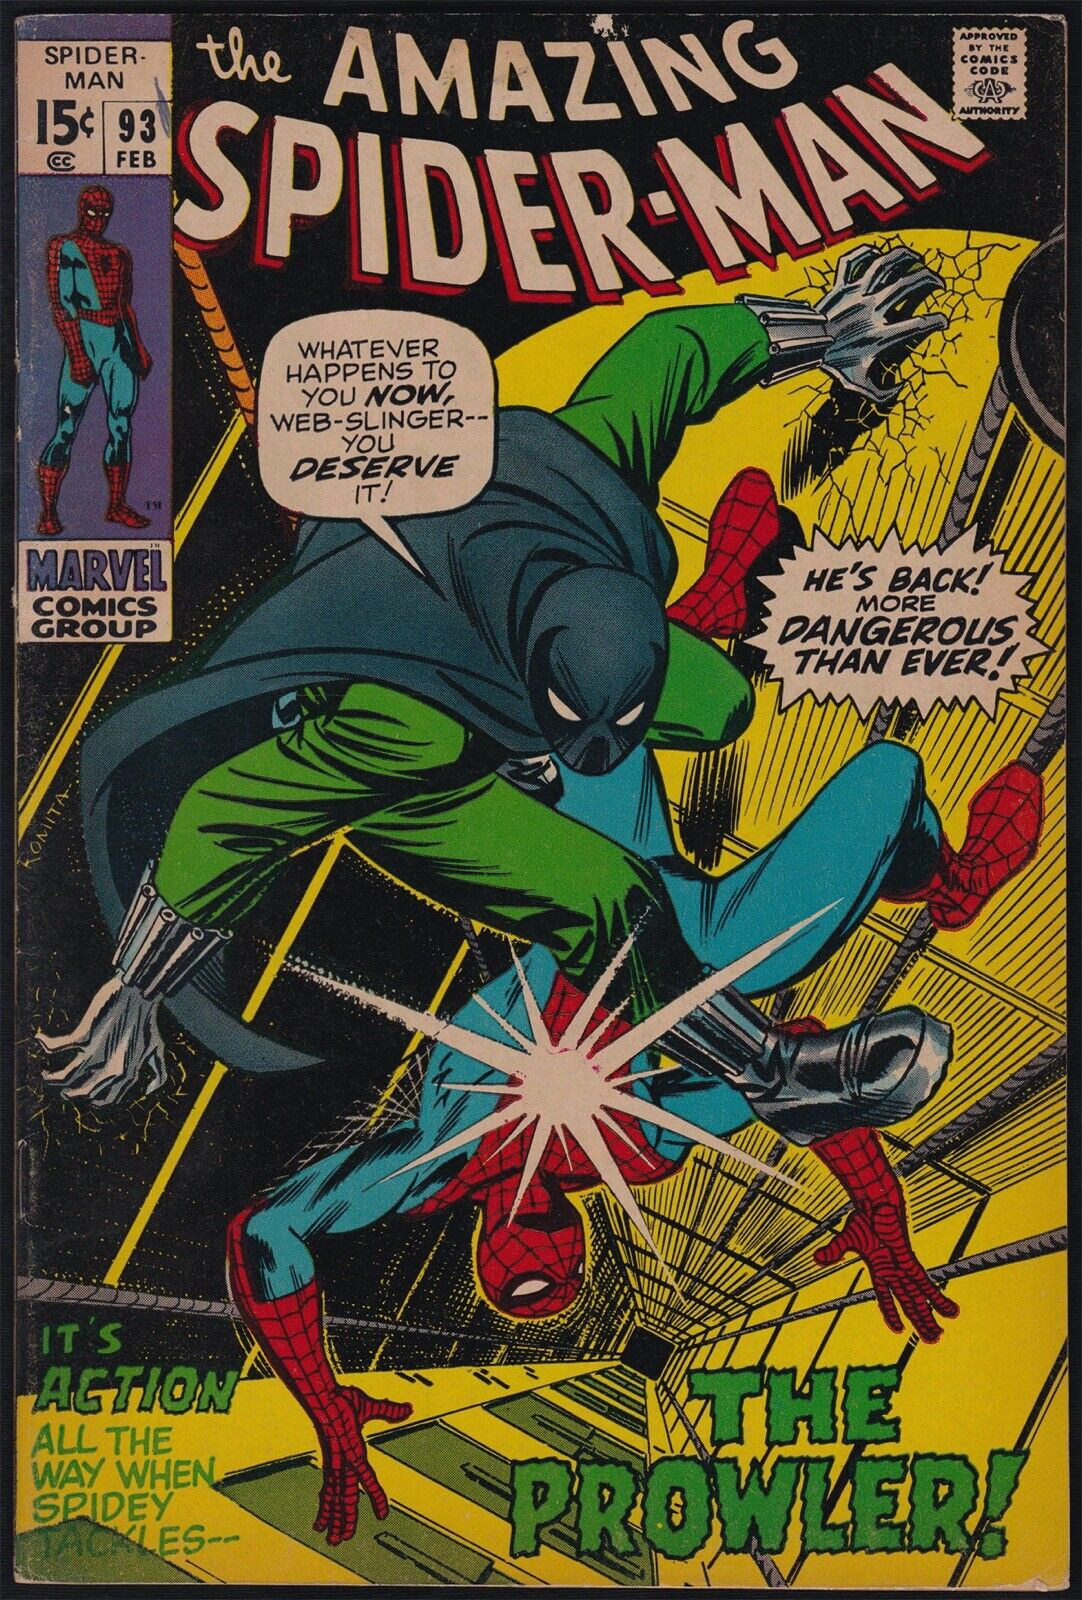 Marvel Comics AMAZING SPIDER-MAN #93 Prowler First Arthur Stacy 1971 FN